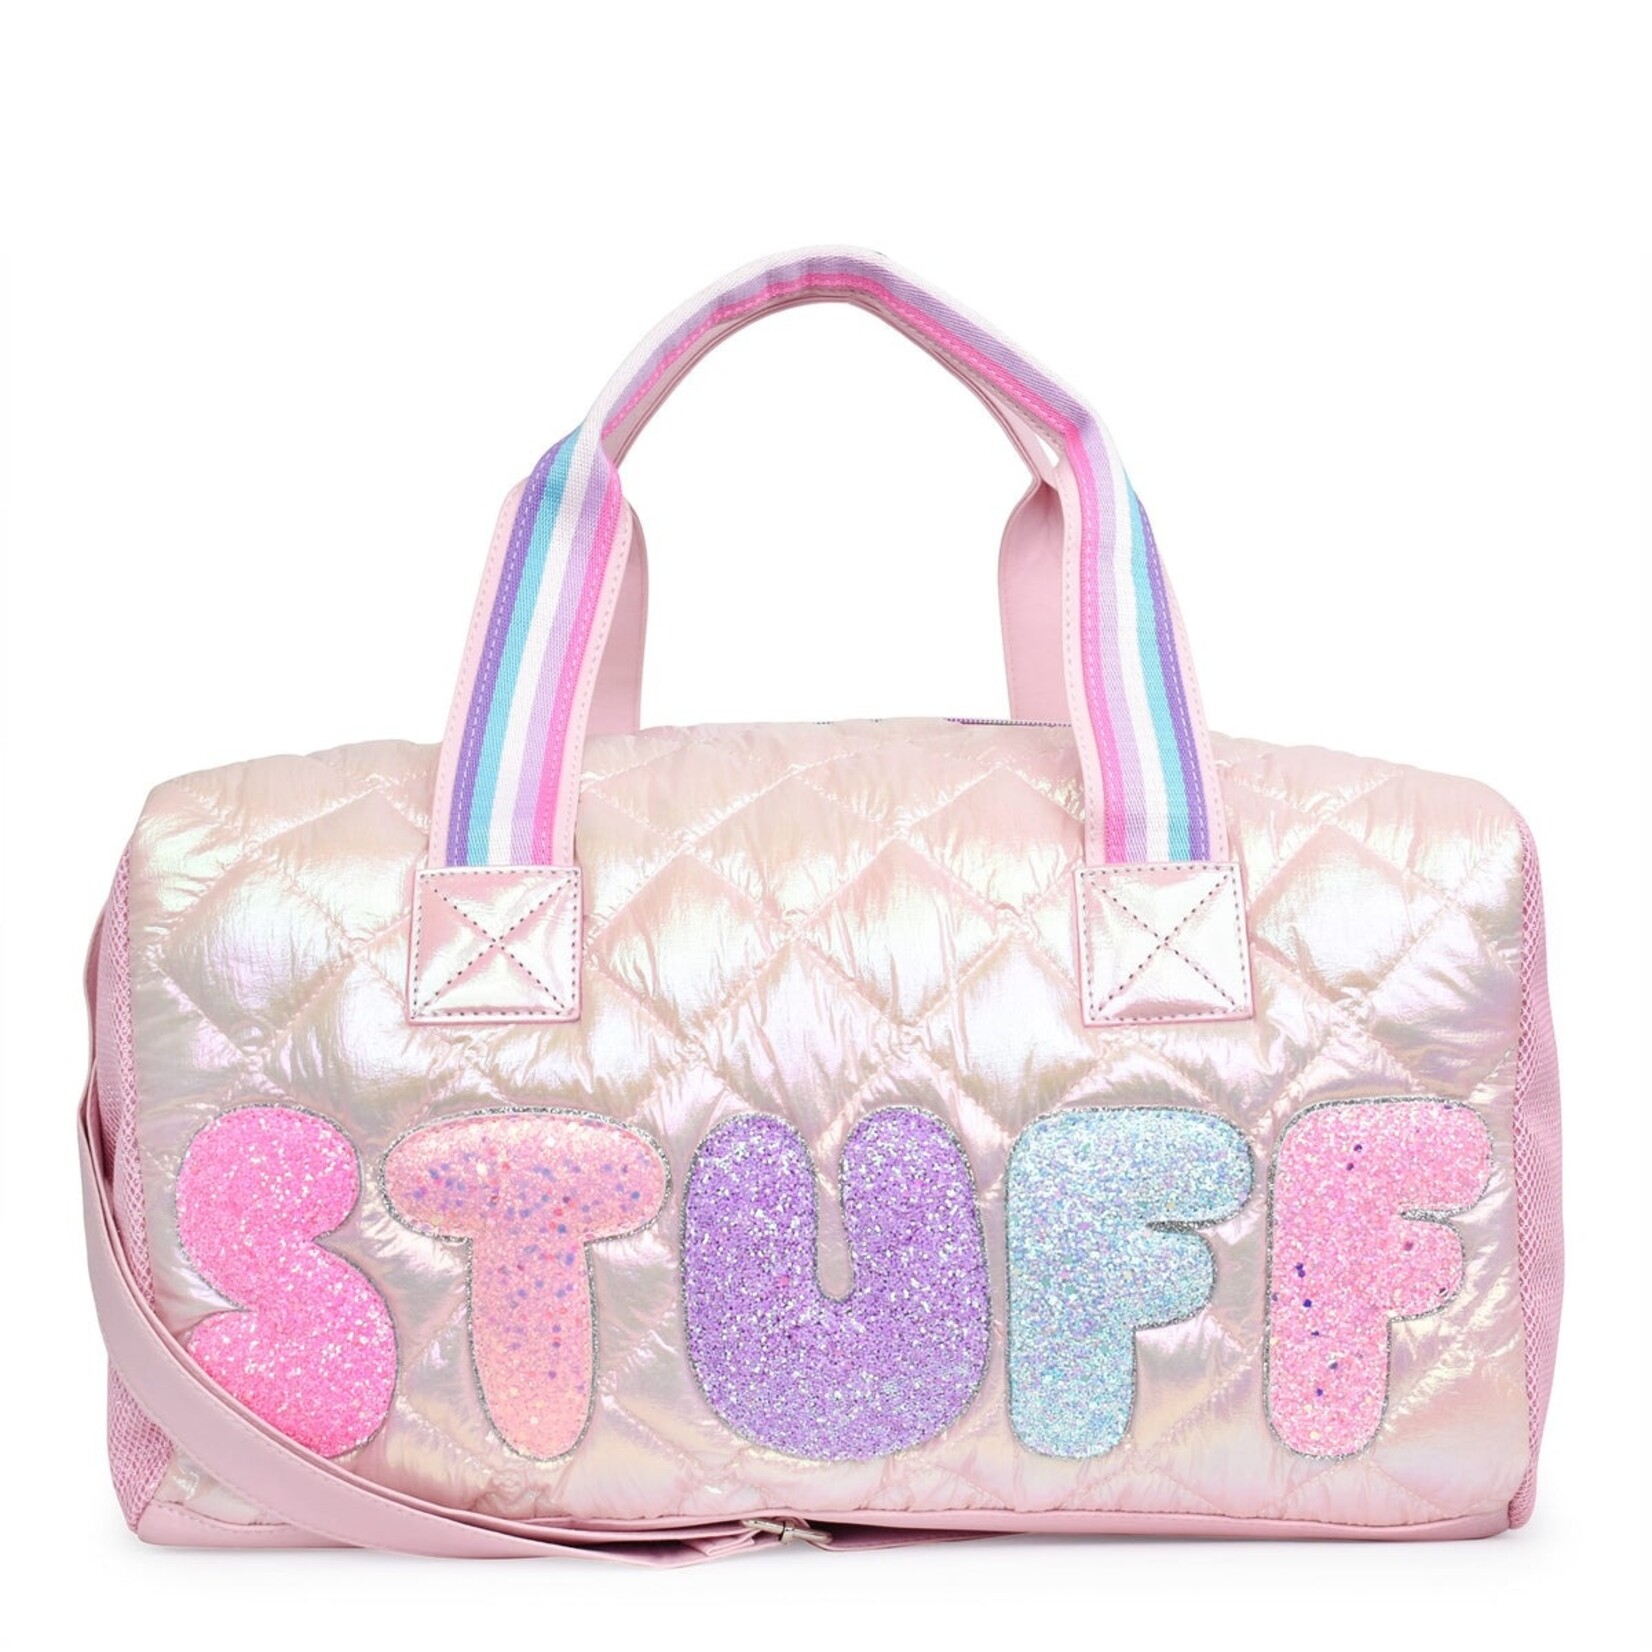 OMG Accessories Stuff Quilted Large Pink Duffle